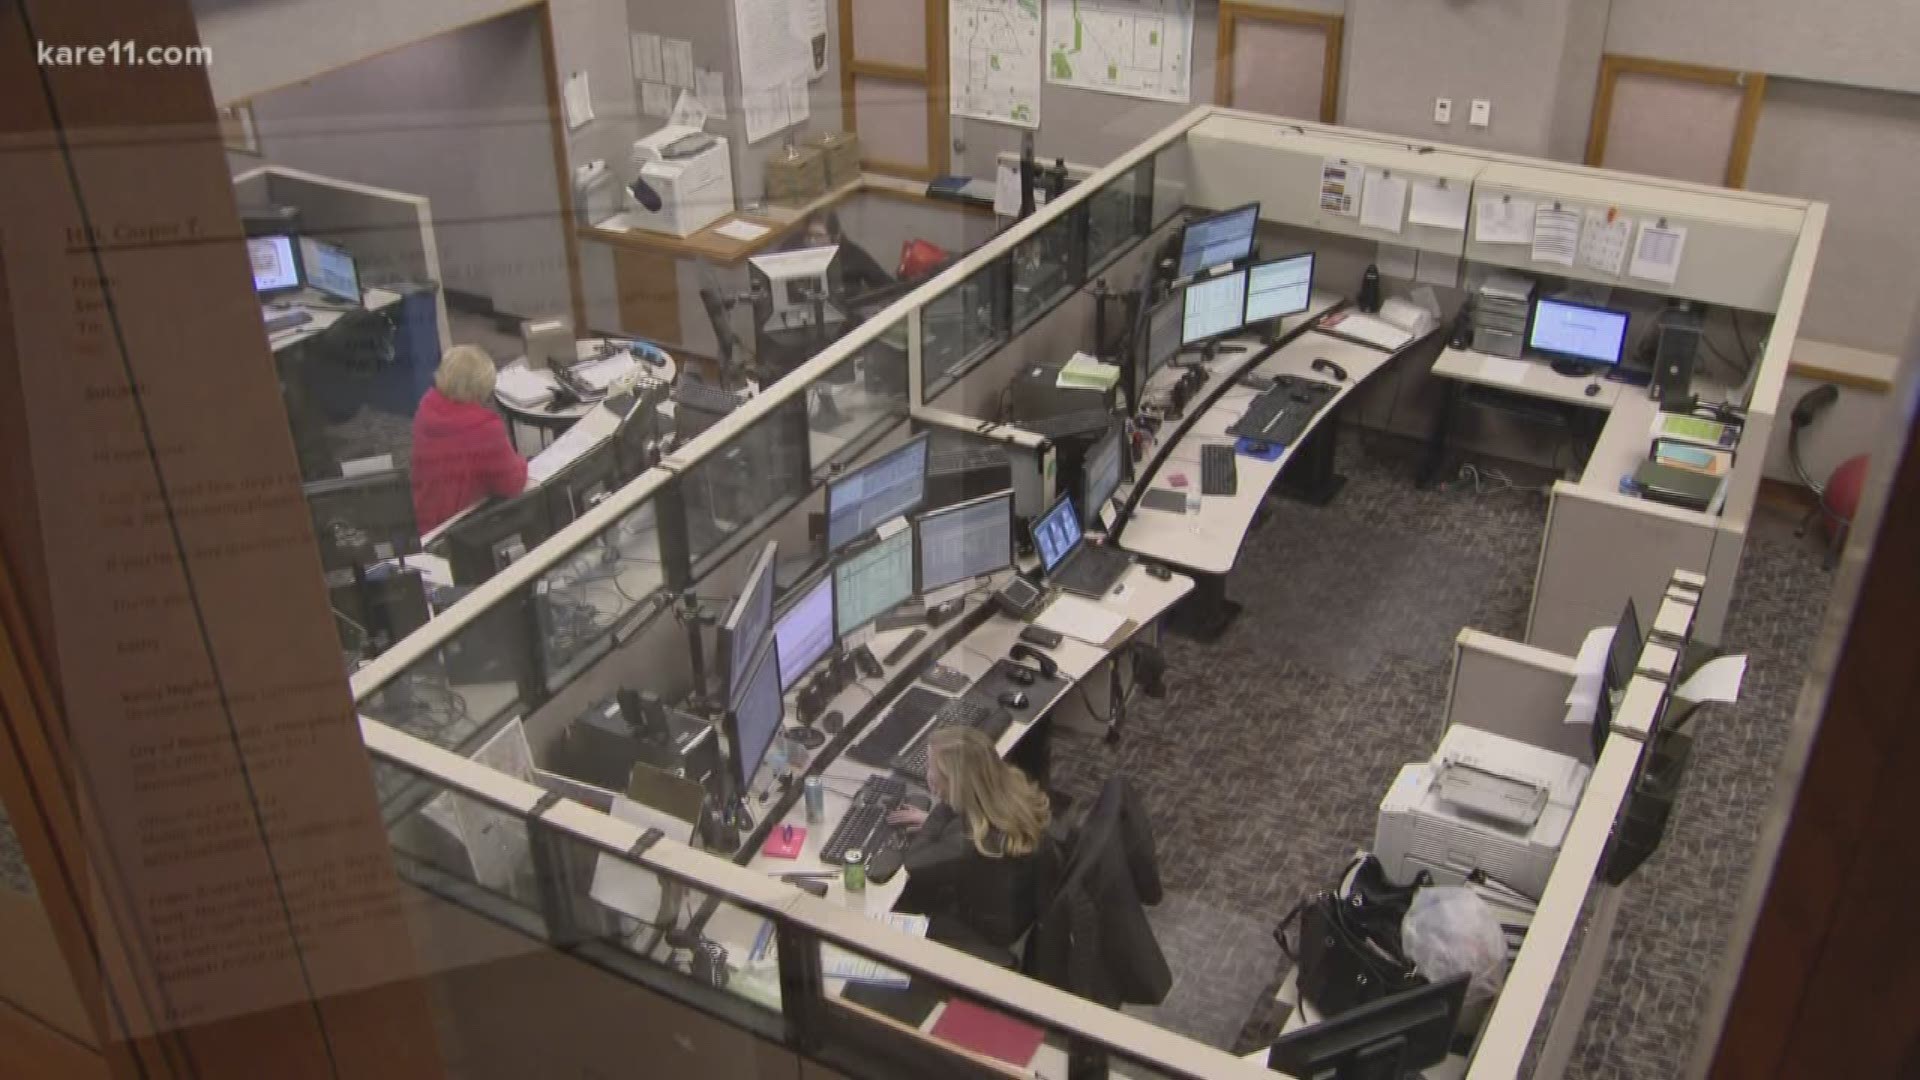 The city of Minneapolis has decided to stop using a computer system used to process 911 calls, which the city's police union and a former dispatcher call "dangerous" and "detrimental."